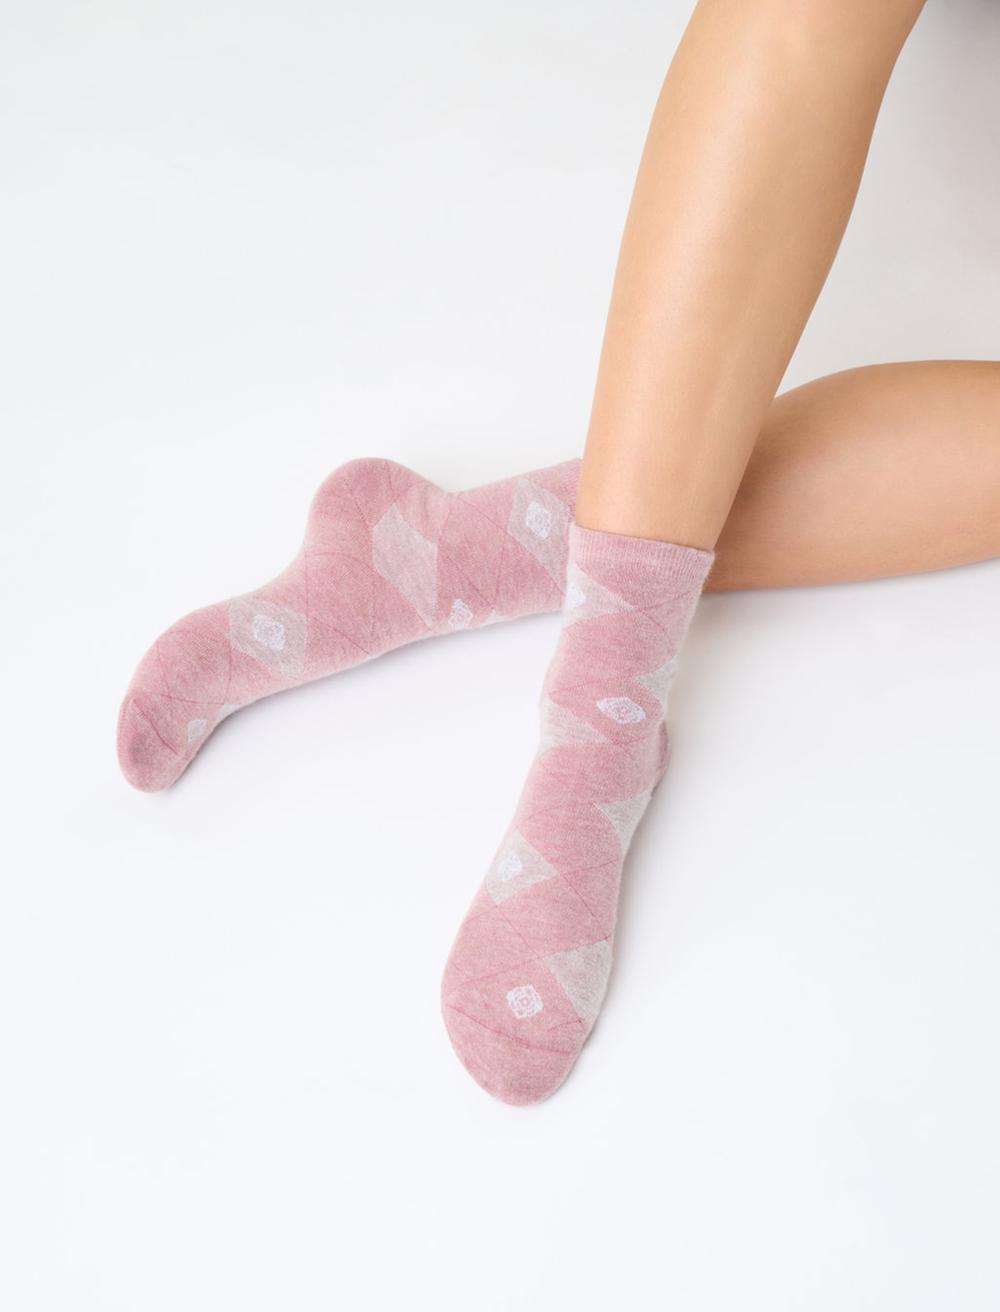 SiSi British Calzino - Soft and warm crew length ankle socks with a diamond and rose pattern, available in pale dusty pink, grey and denim blue, and orange.